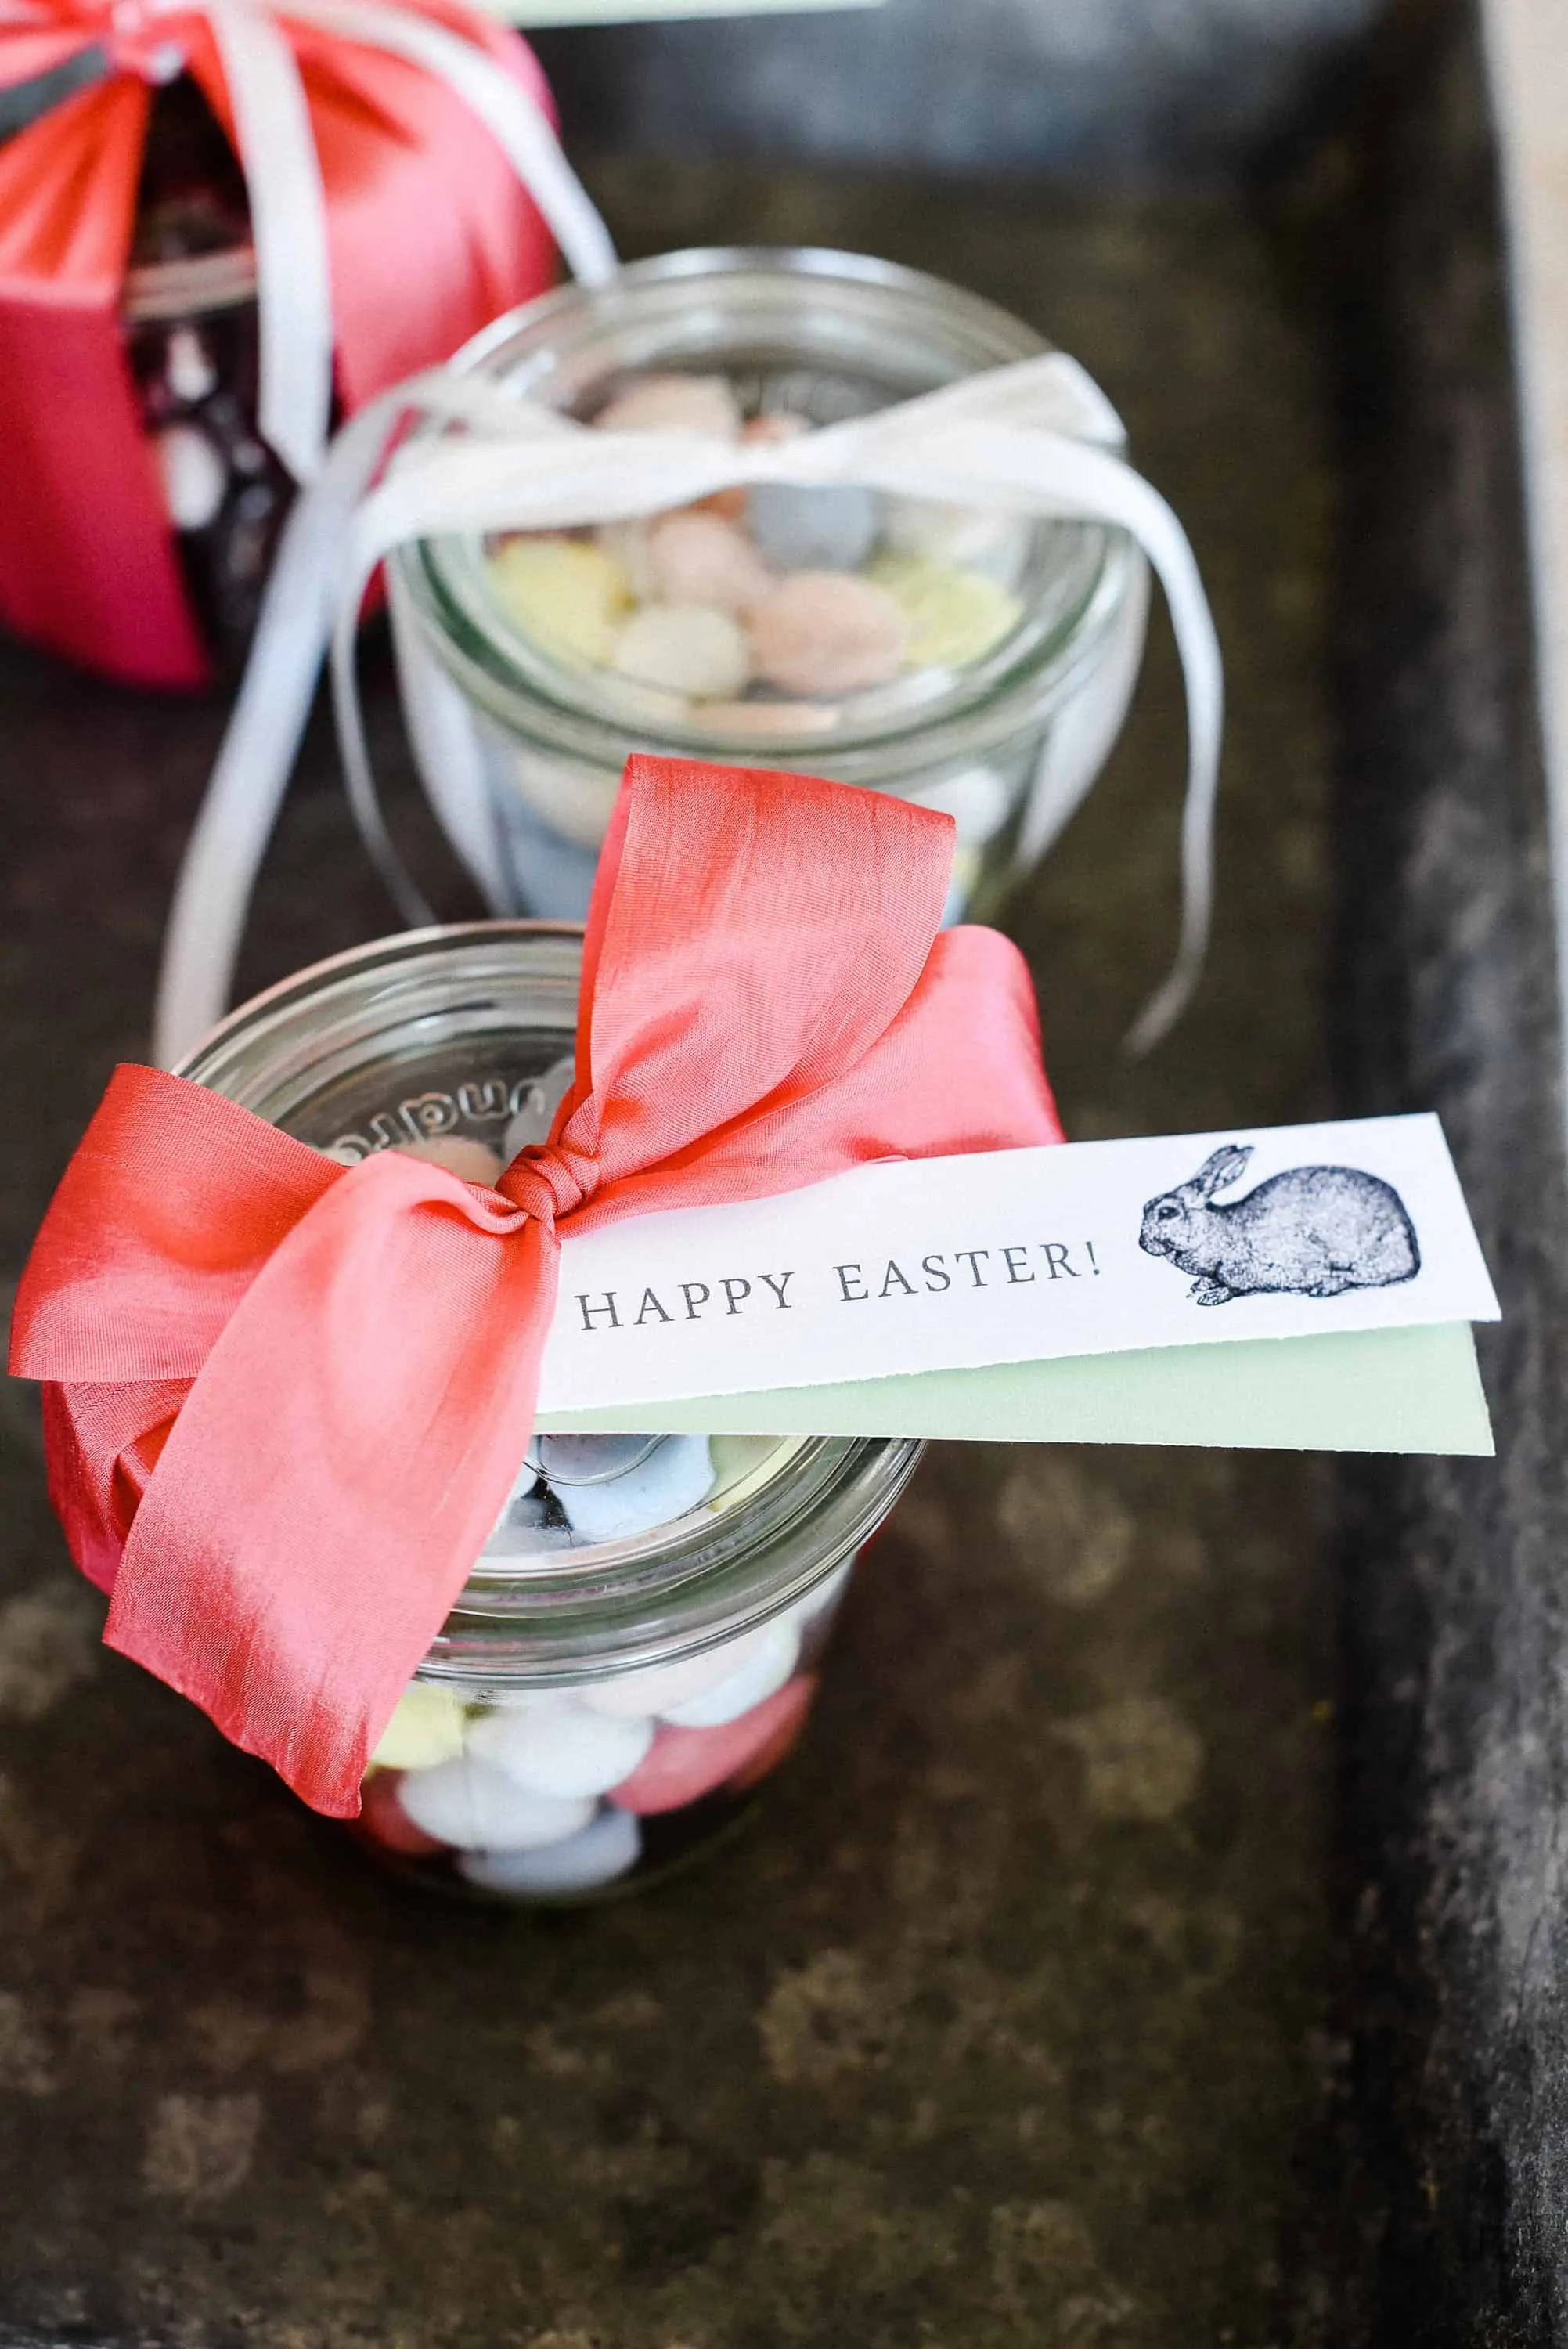 Easter treats are made even sweeter with these free printable gift tags! Make Easter bark and finish it off with printable gift tags! Plus scroll down for links to over 25 darling spring printables!